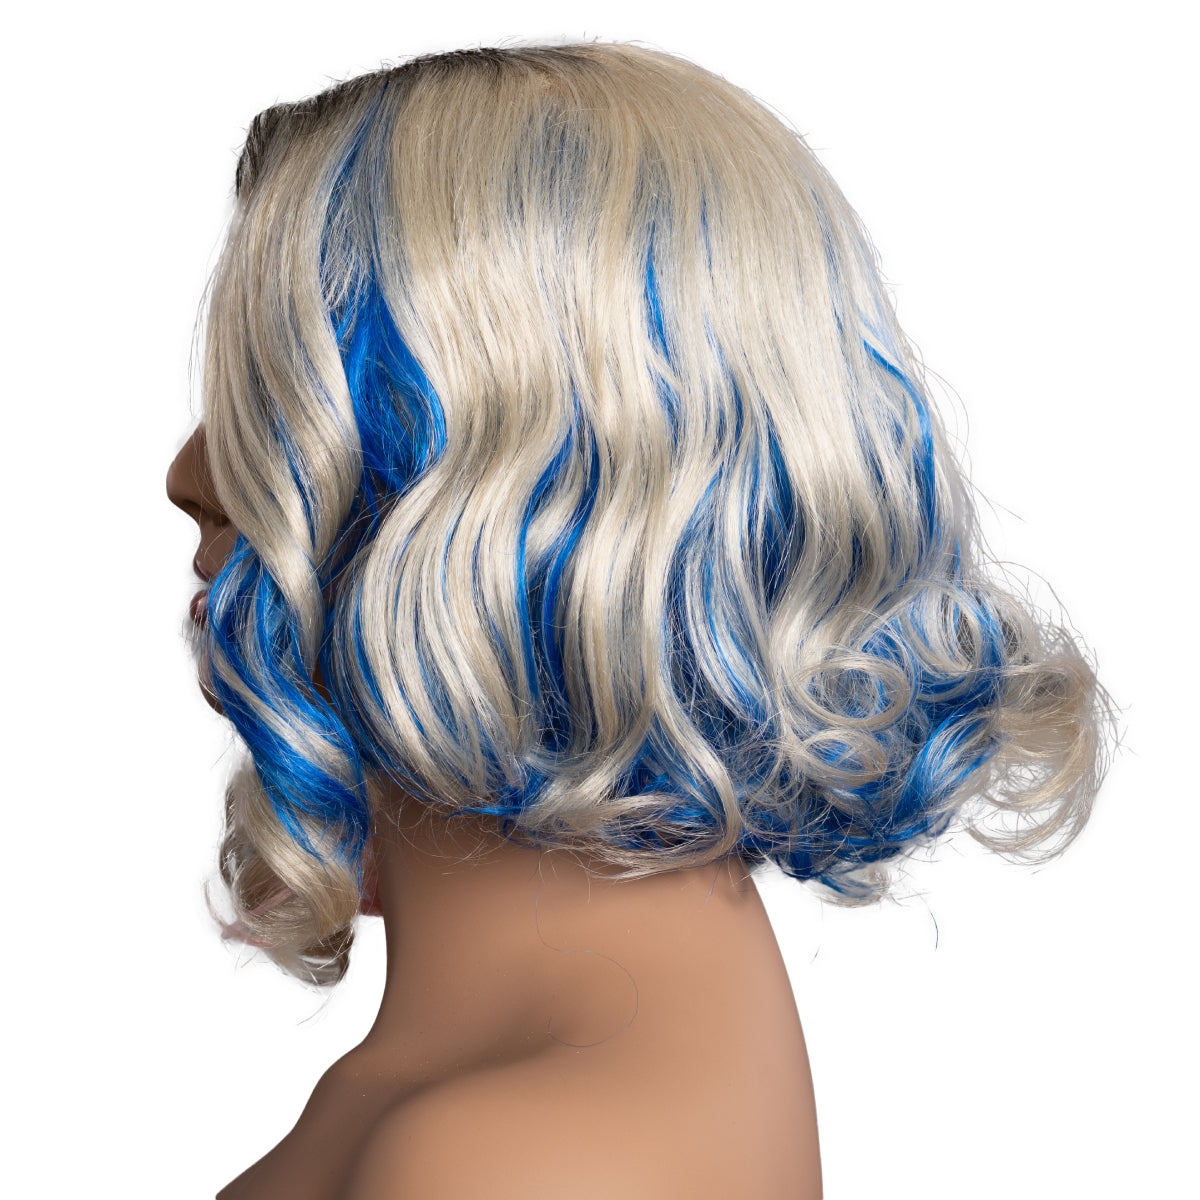 Enid Sinclair Netflix Wednesday TV Show costume Wig Left Side view